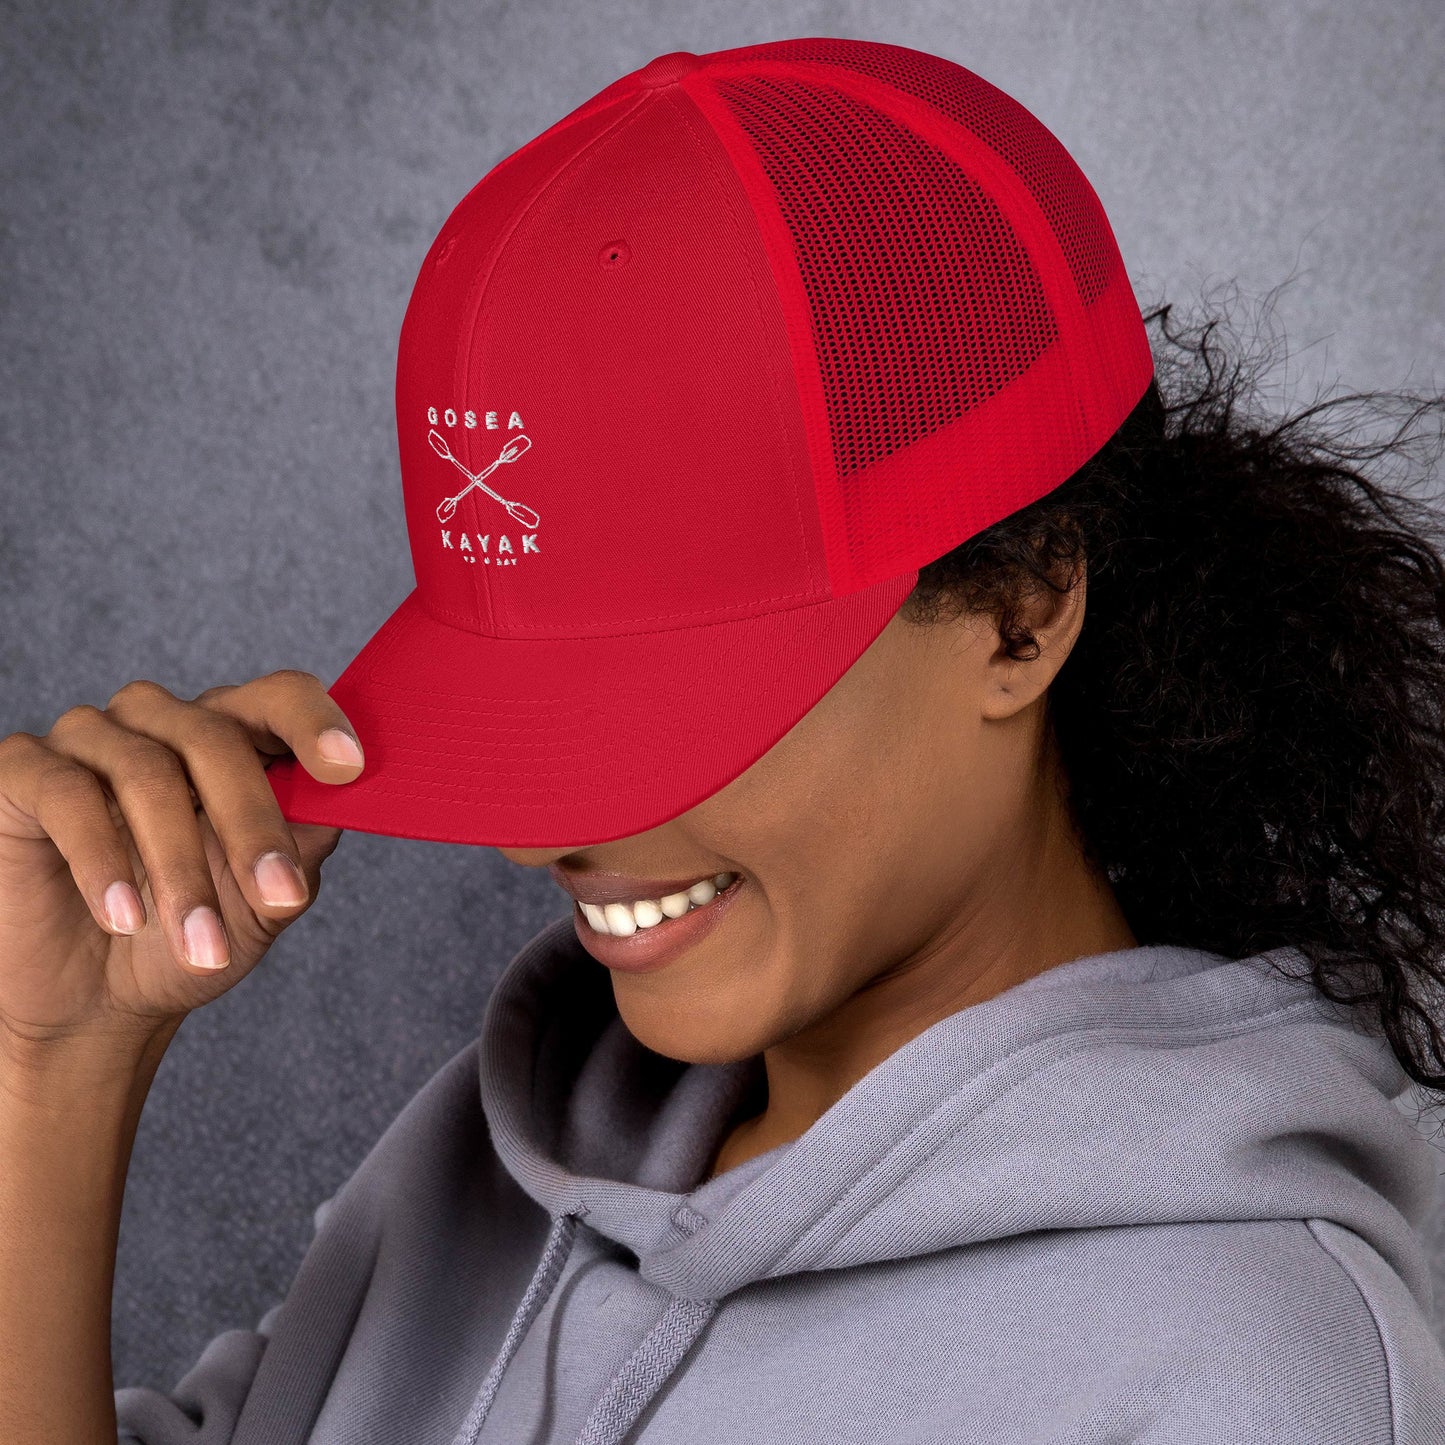  Trucker Cap - Red - side view - being warn by woman with her head down and hand holding the brim - Crossed Paddles Go Sea Kayak Crew logo in white on front - Genuine Byron Bay Merchandise | Produced by Go Sea Kayak Byron Bay 